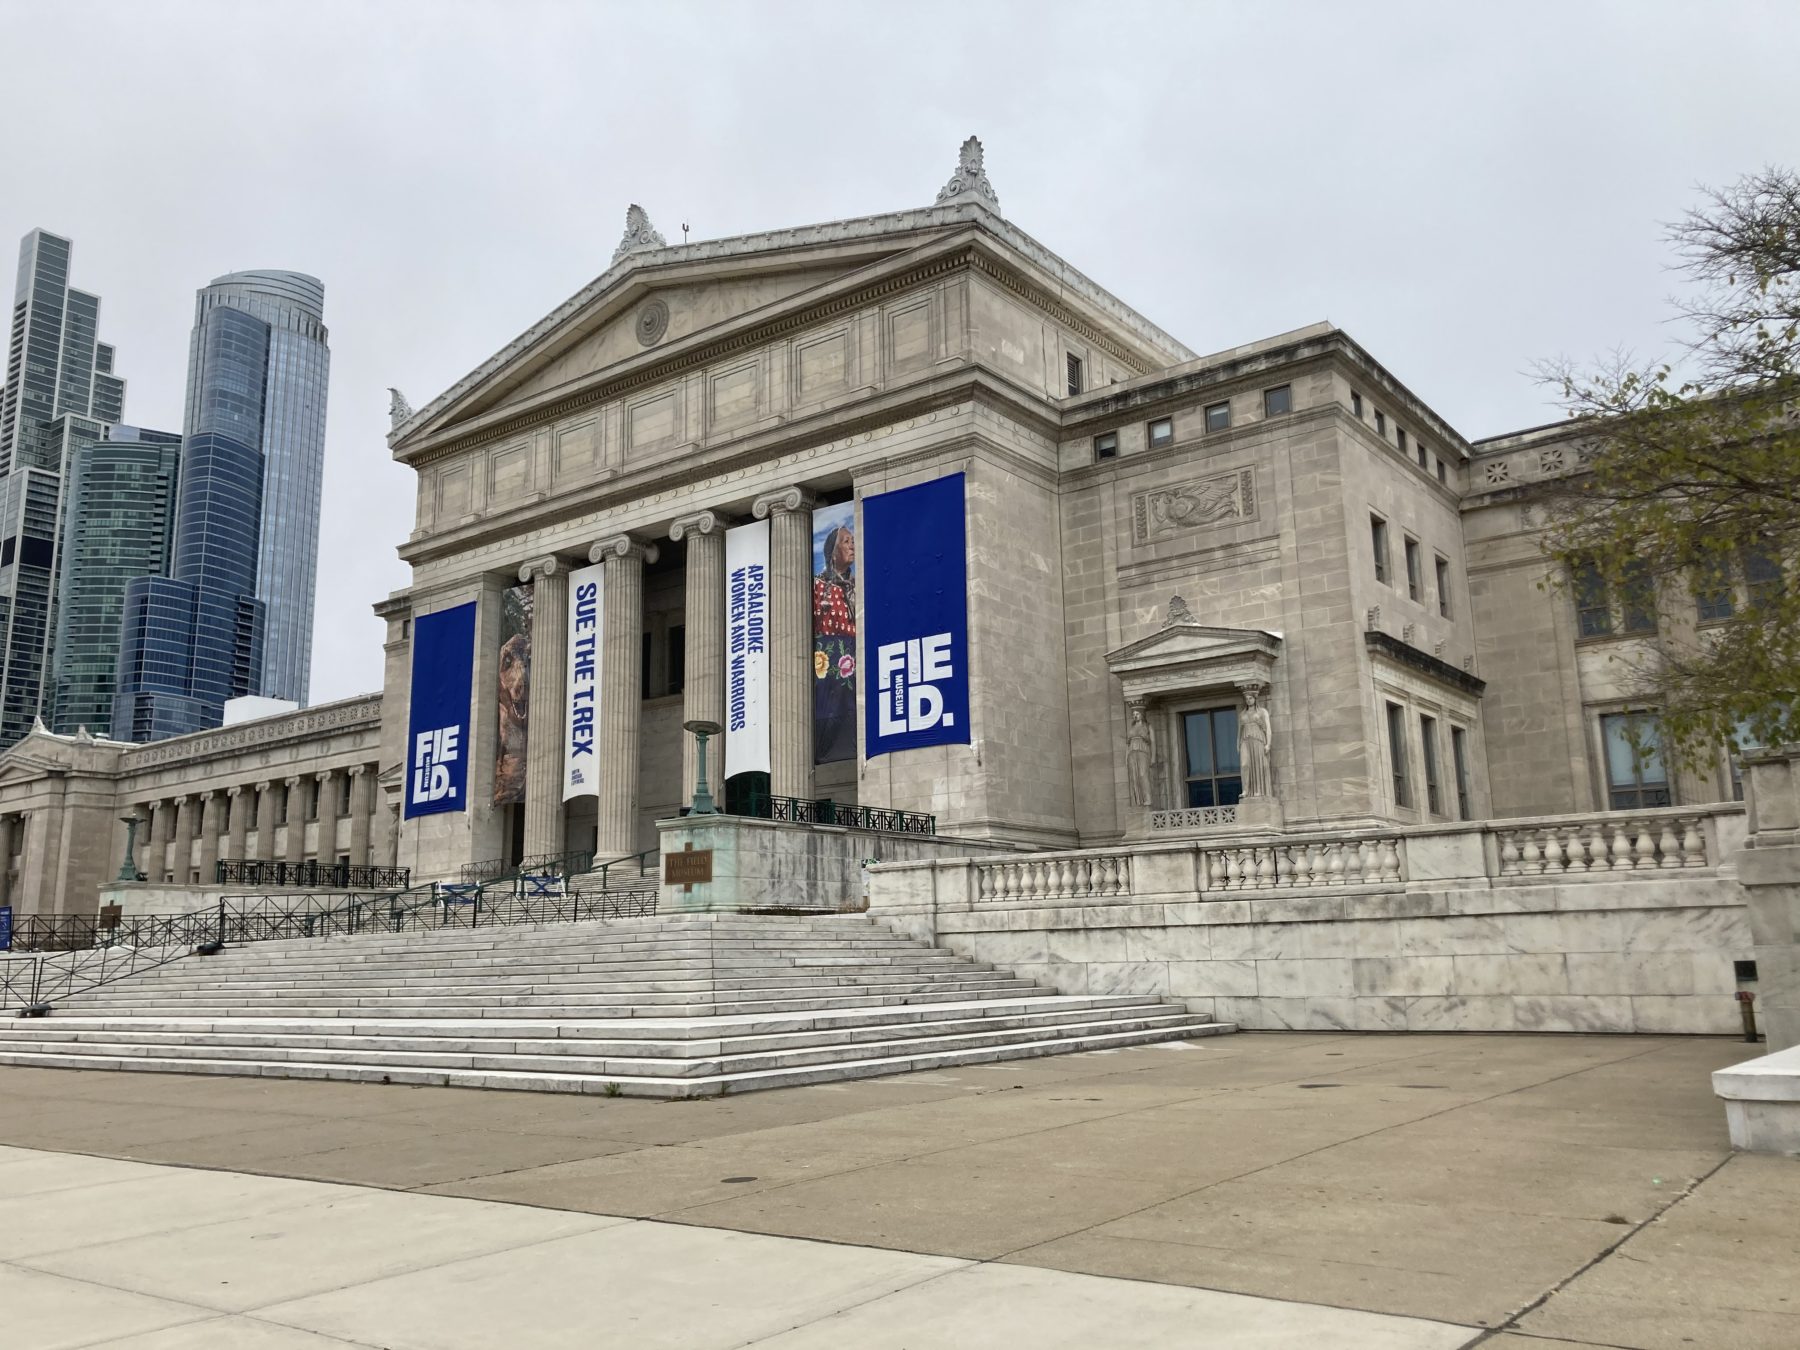 Museums in Chicago